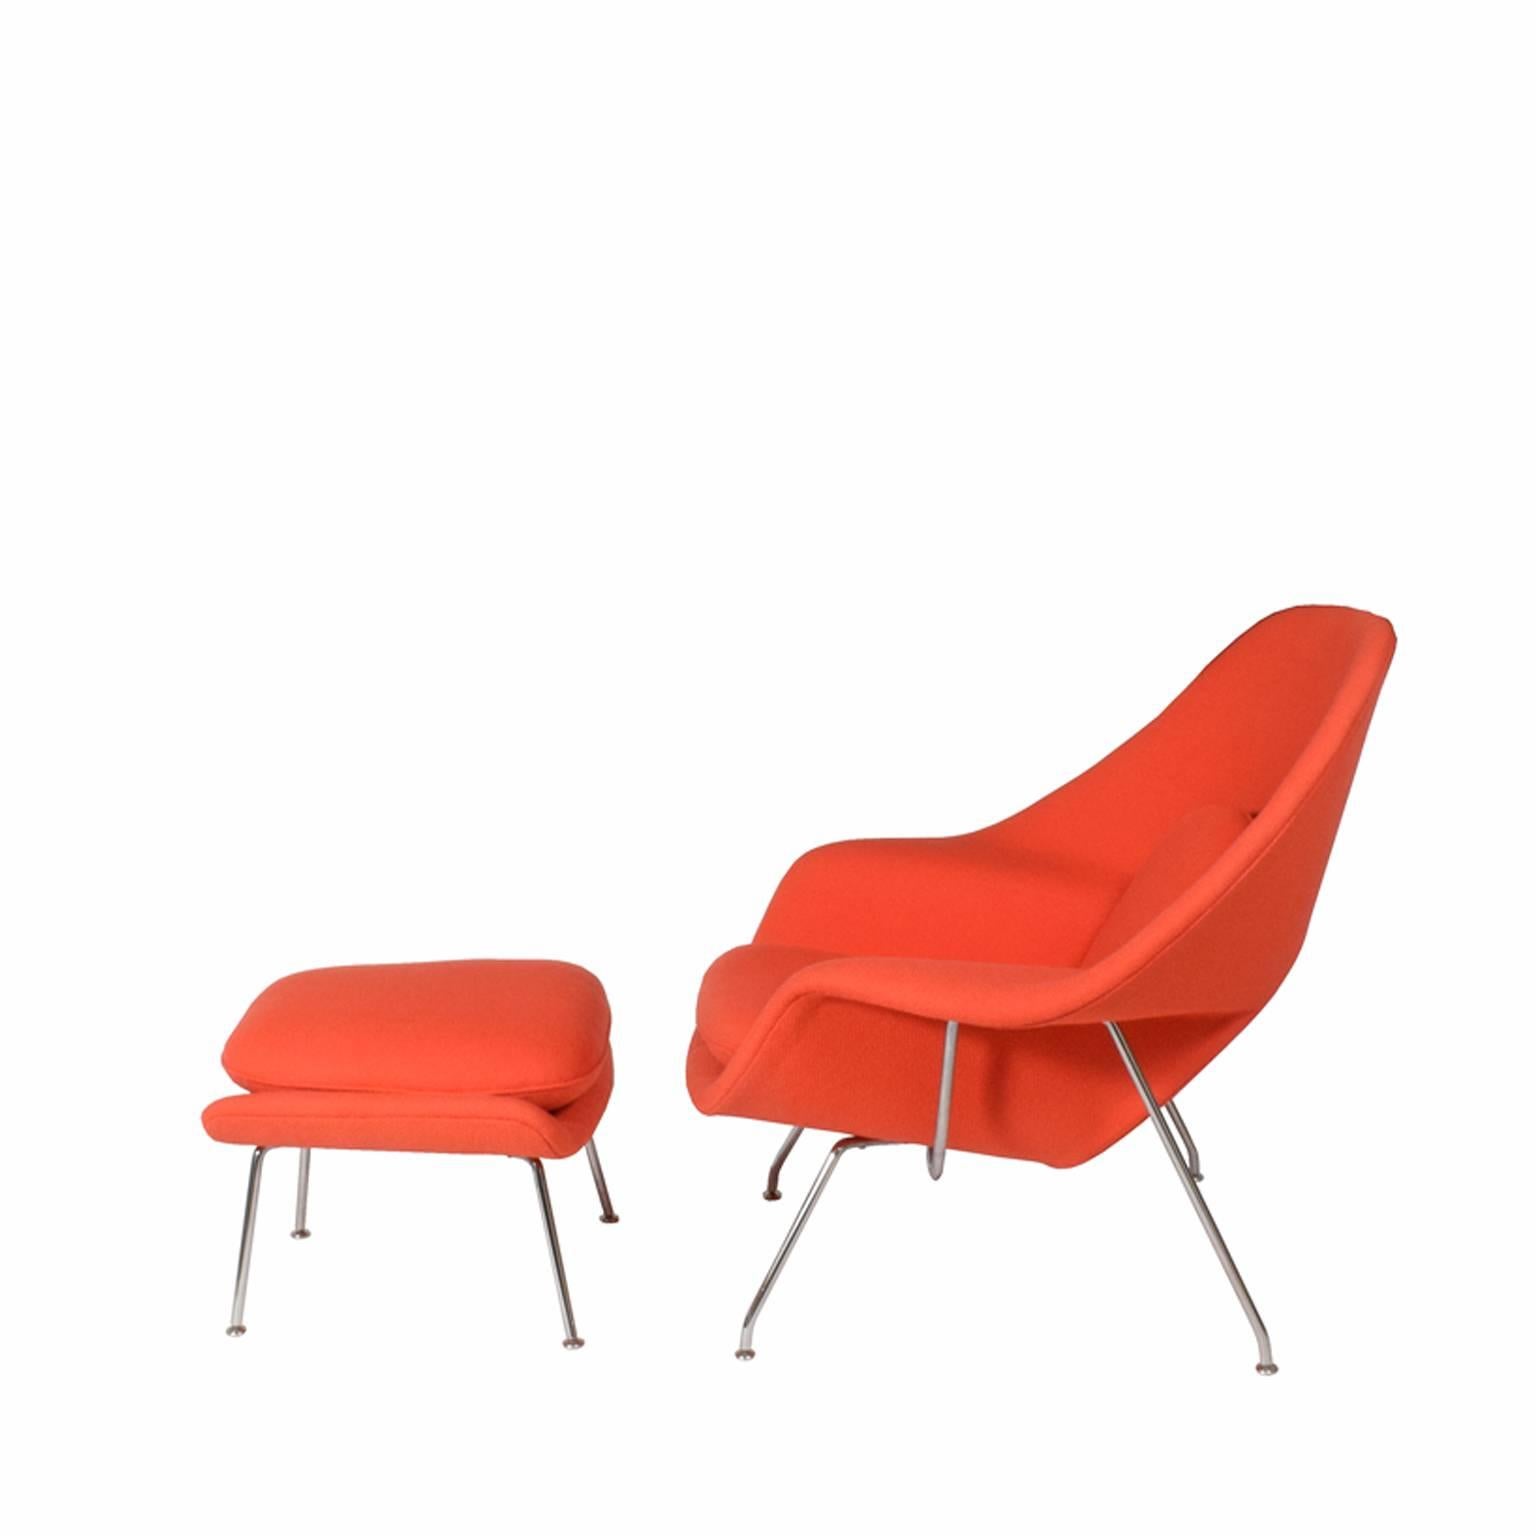 A Classic from 1947 is still beautiful today. Designed by Eero Saarinen. Chrome steel tub base and orange relish fabric.